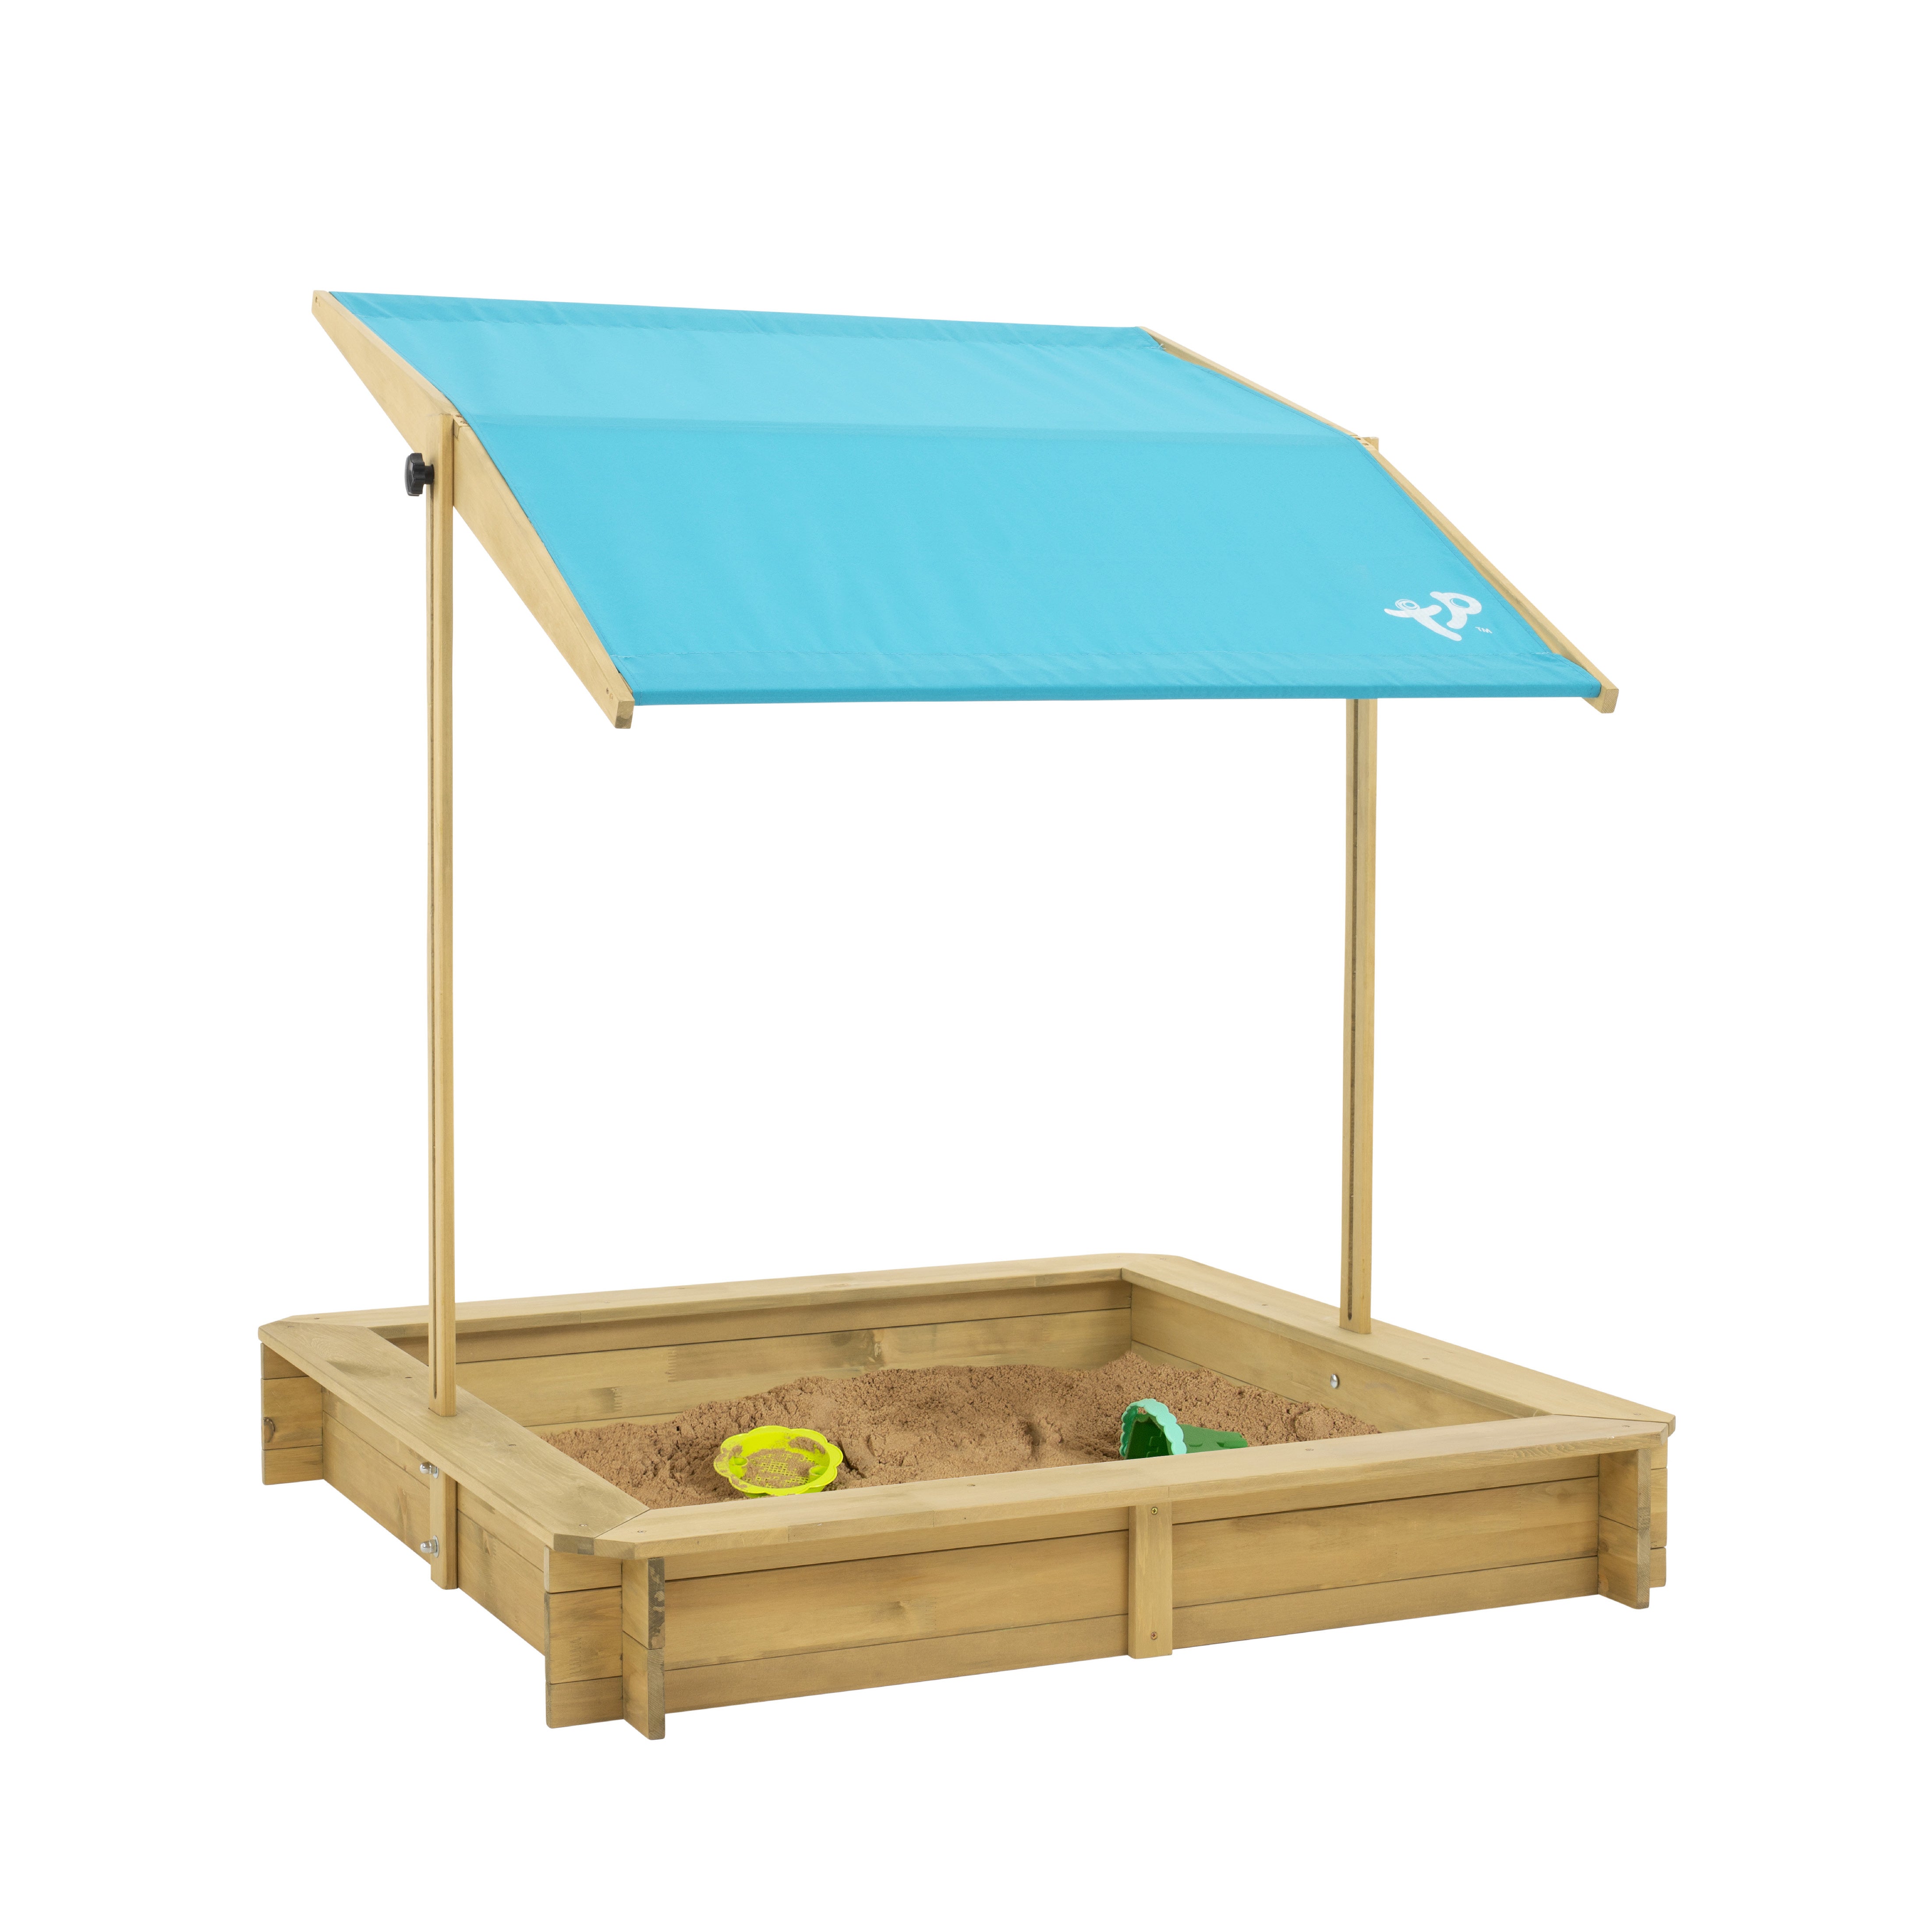 TP Wooden Sandpit with Sun Canopy - FSC<sup>®</sup> certified